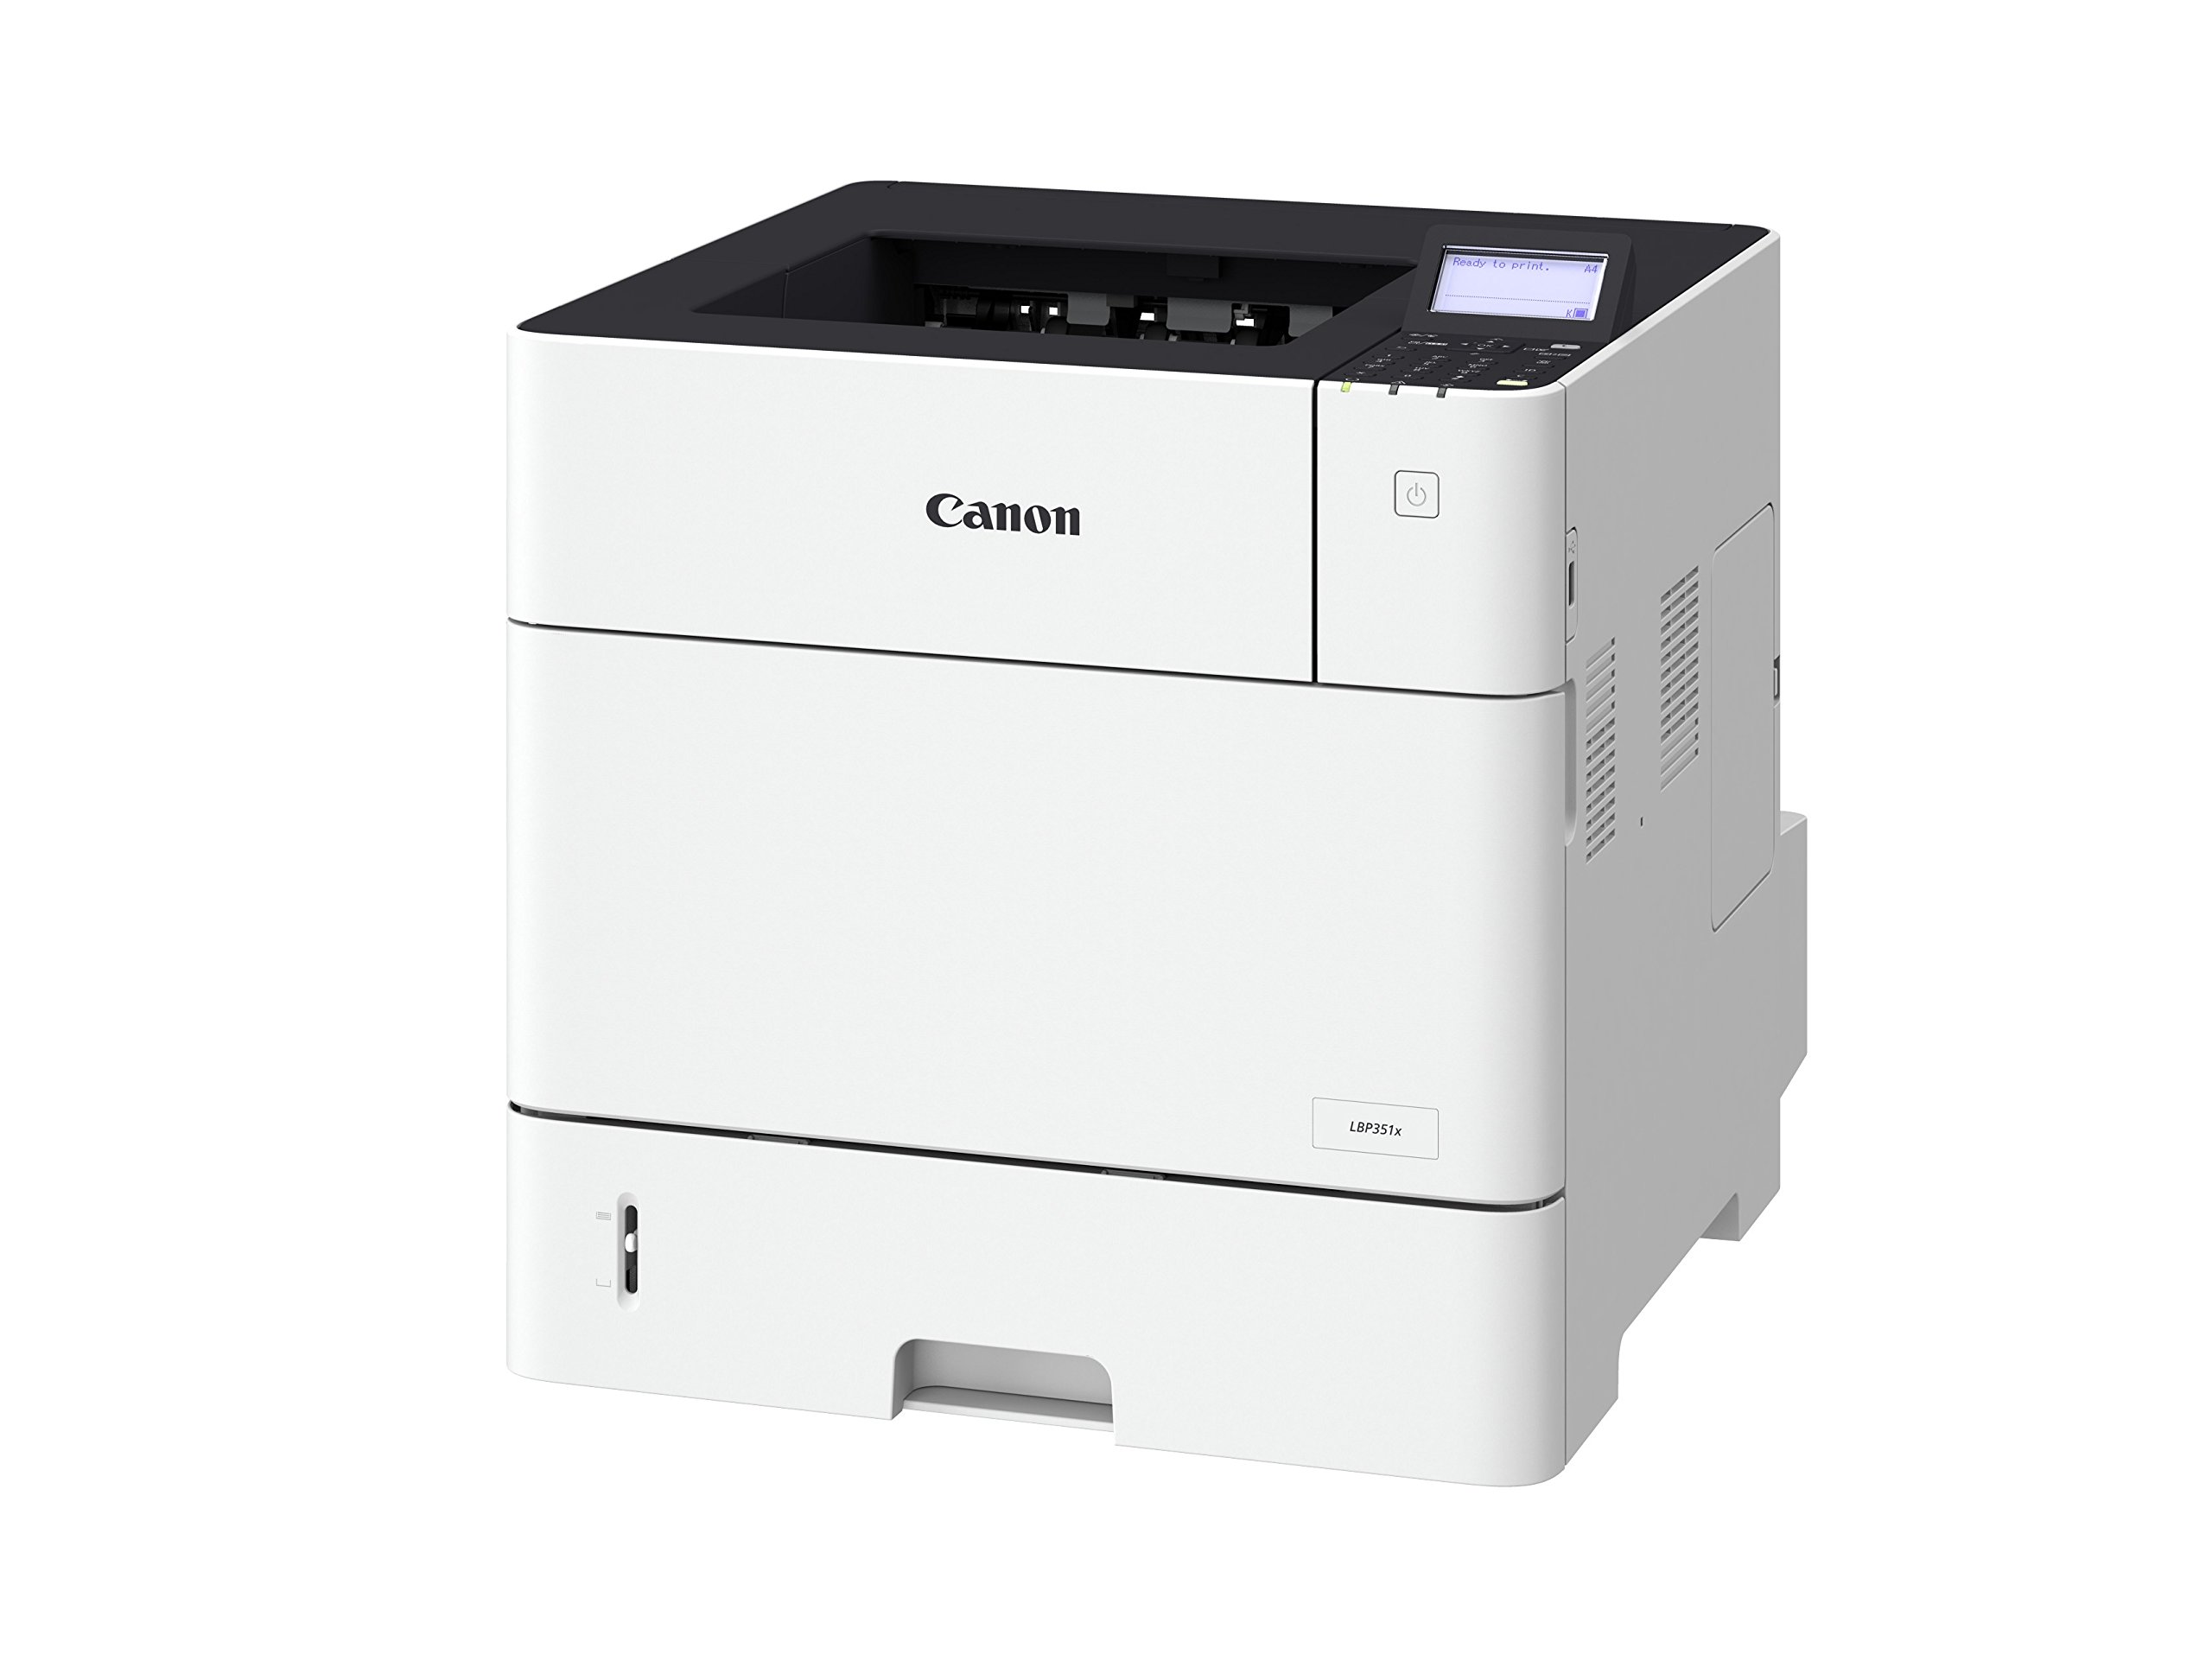 How to Install Canon LBP351x/LBP352X Printer - Featured